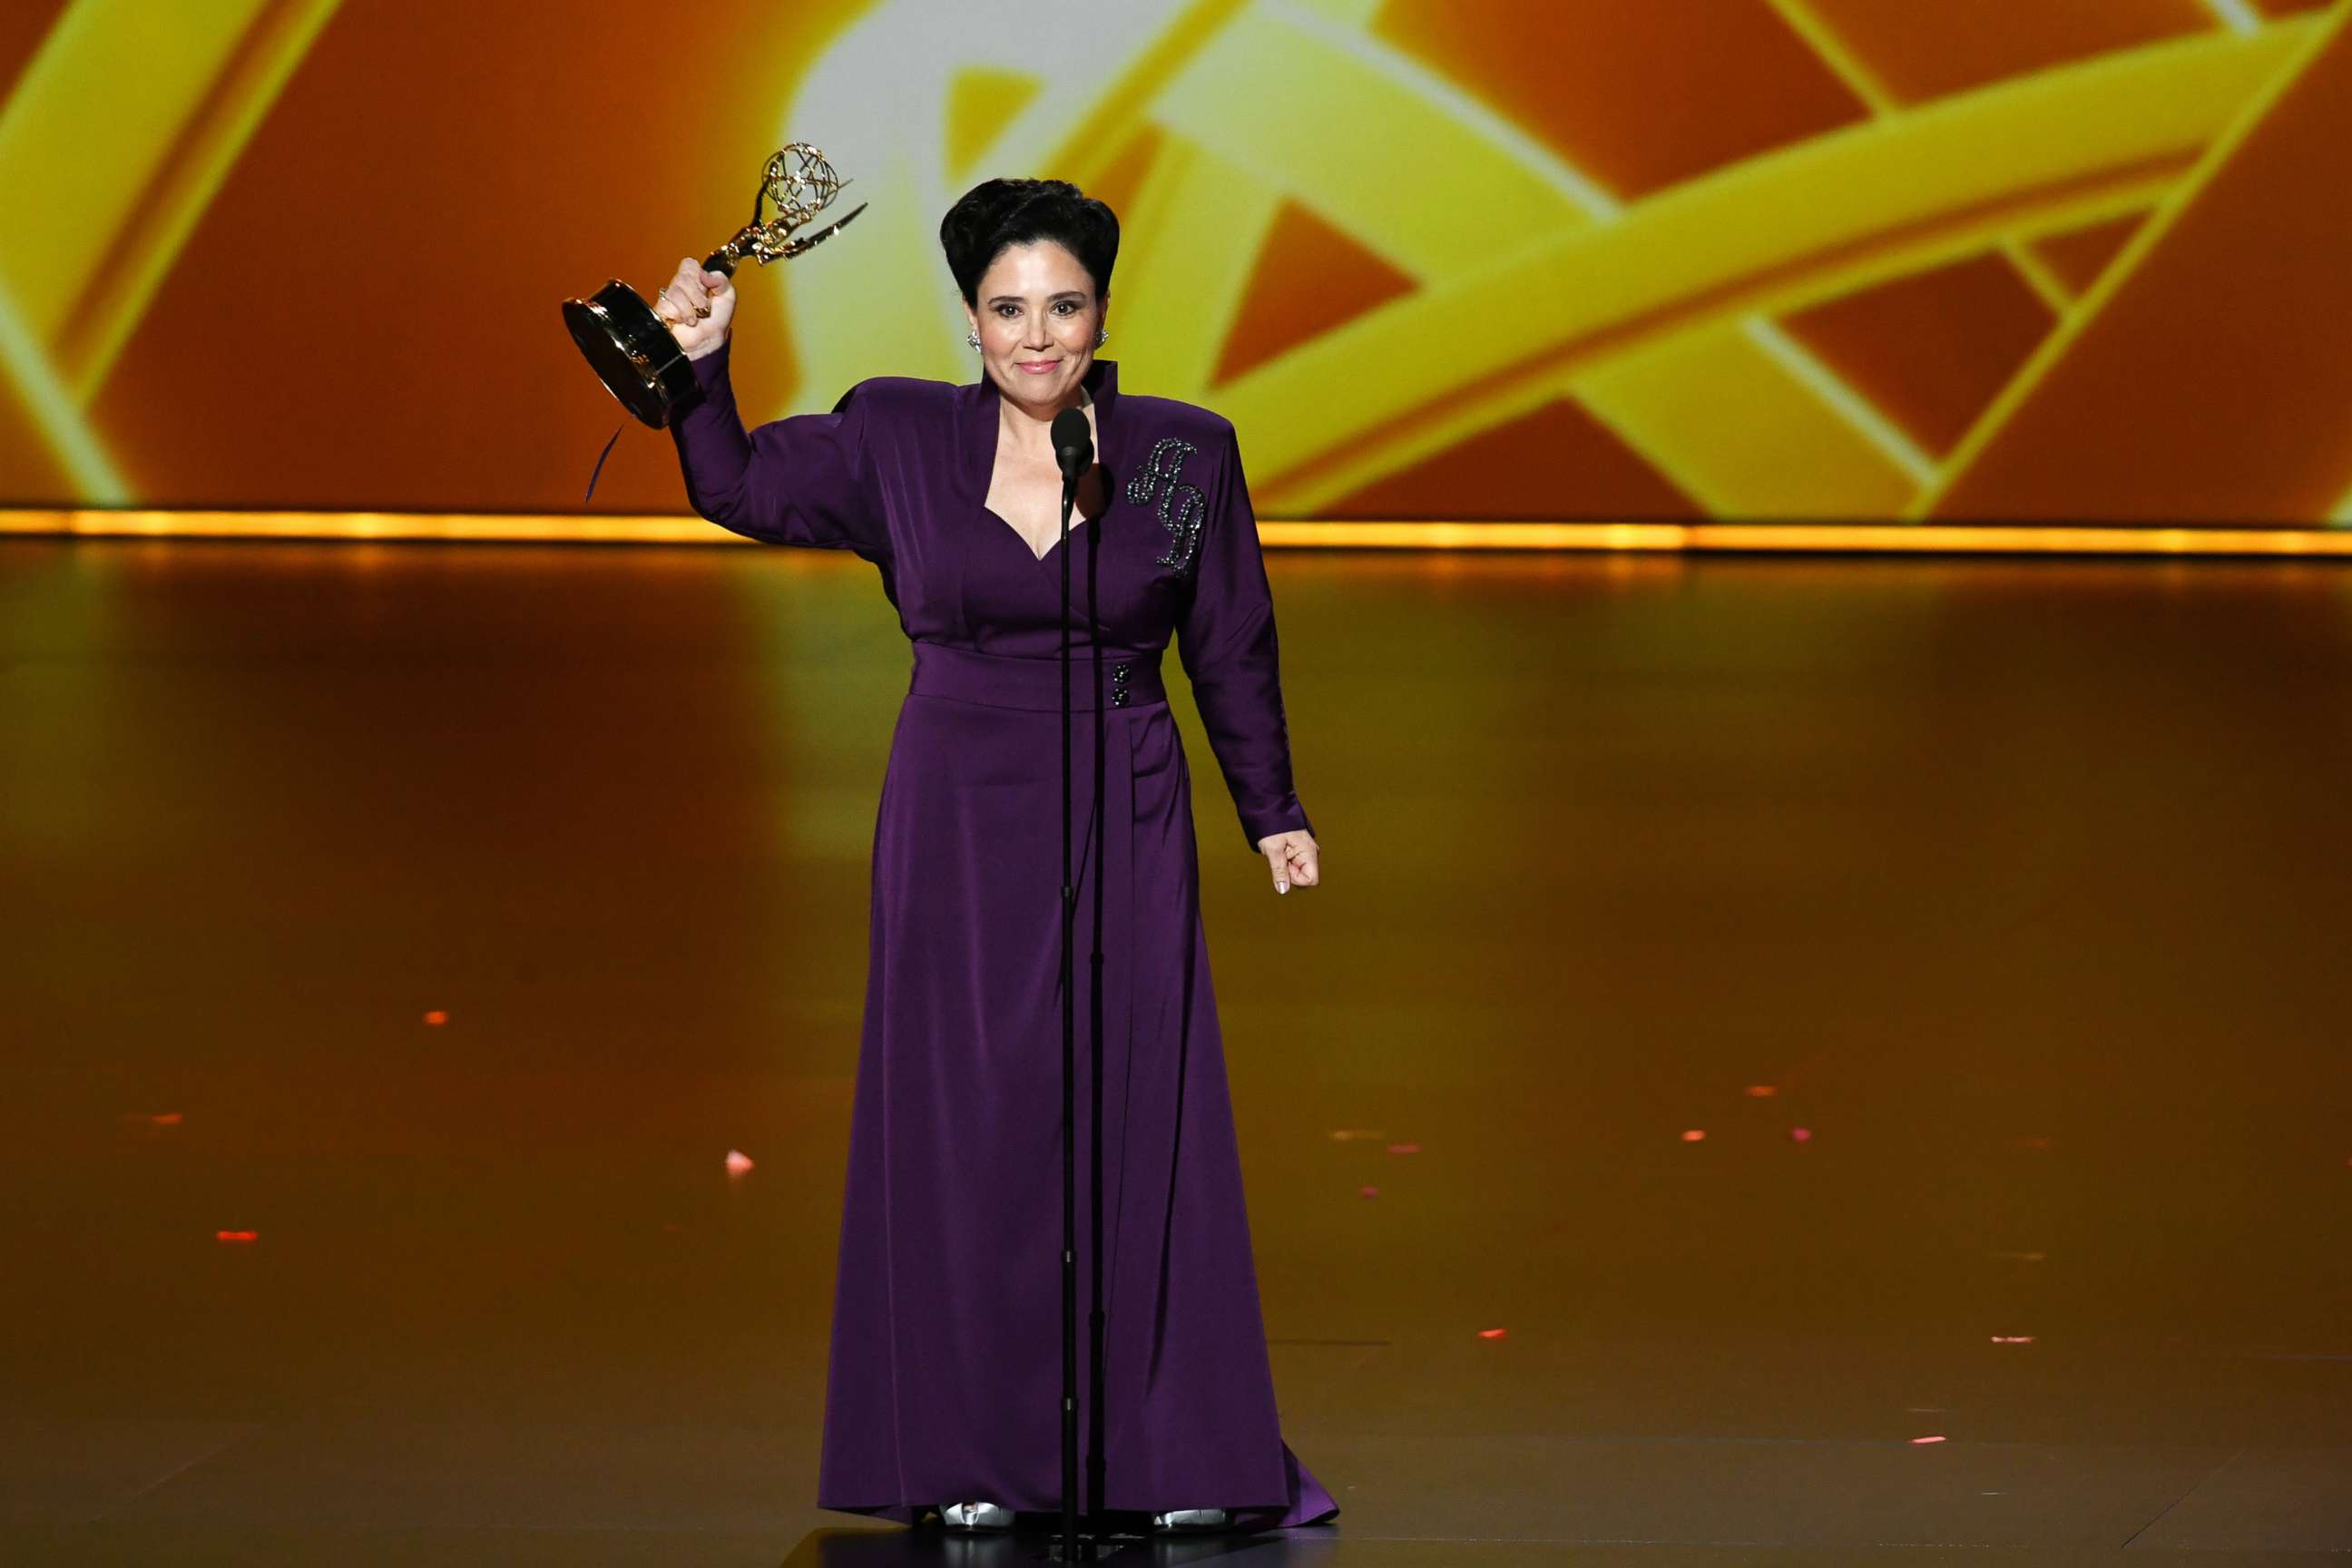 PHOTO: Alex Borstein accepts the Outstanding Supporting Actress in a Comedy Series award for 'The Marvelous Mrs. Maisel' onstage during the 71st Emmy Awards at Microsoft Theater on September 22, 2019 in Los Angeles, California.